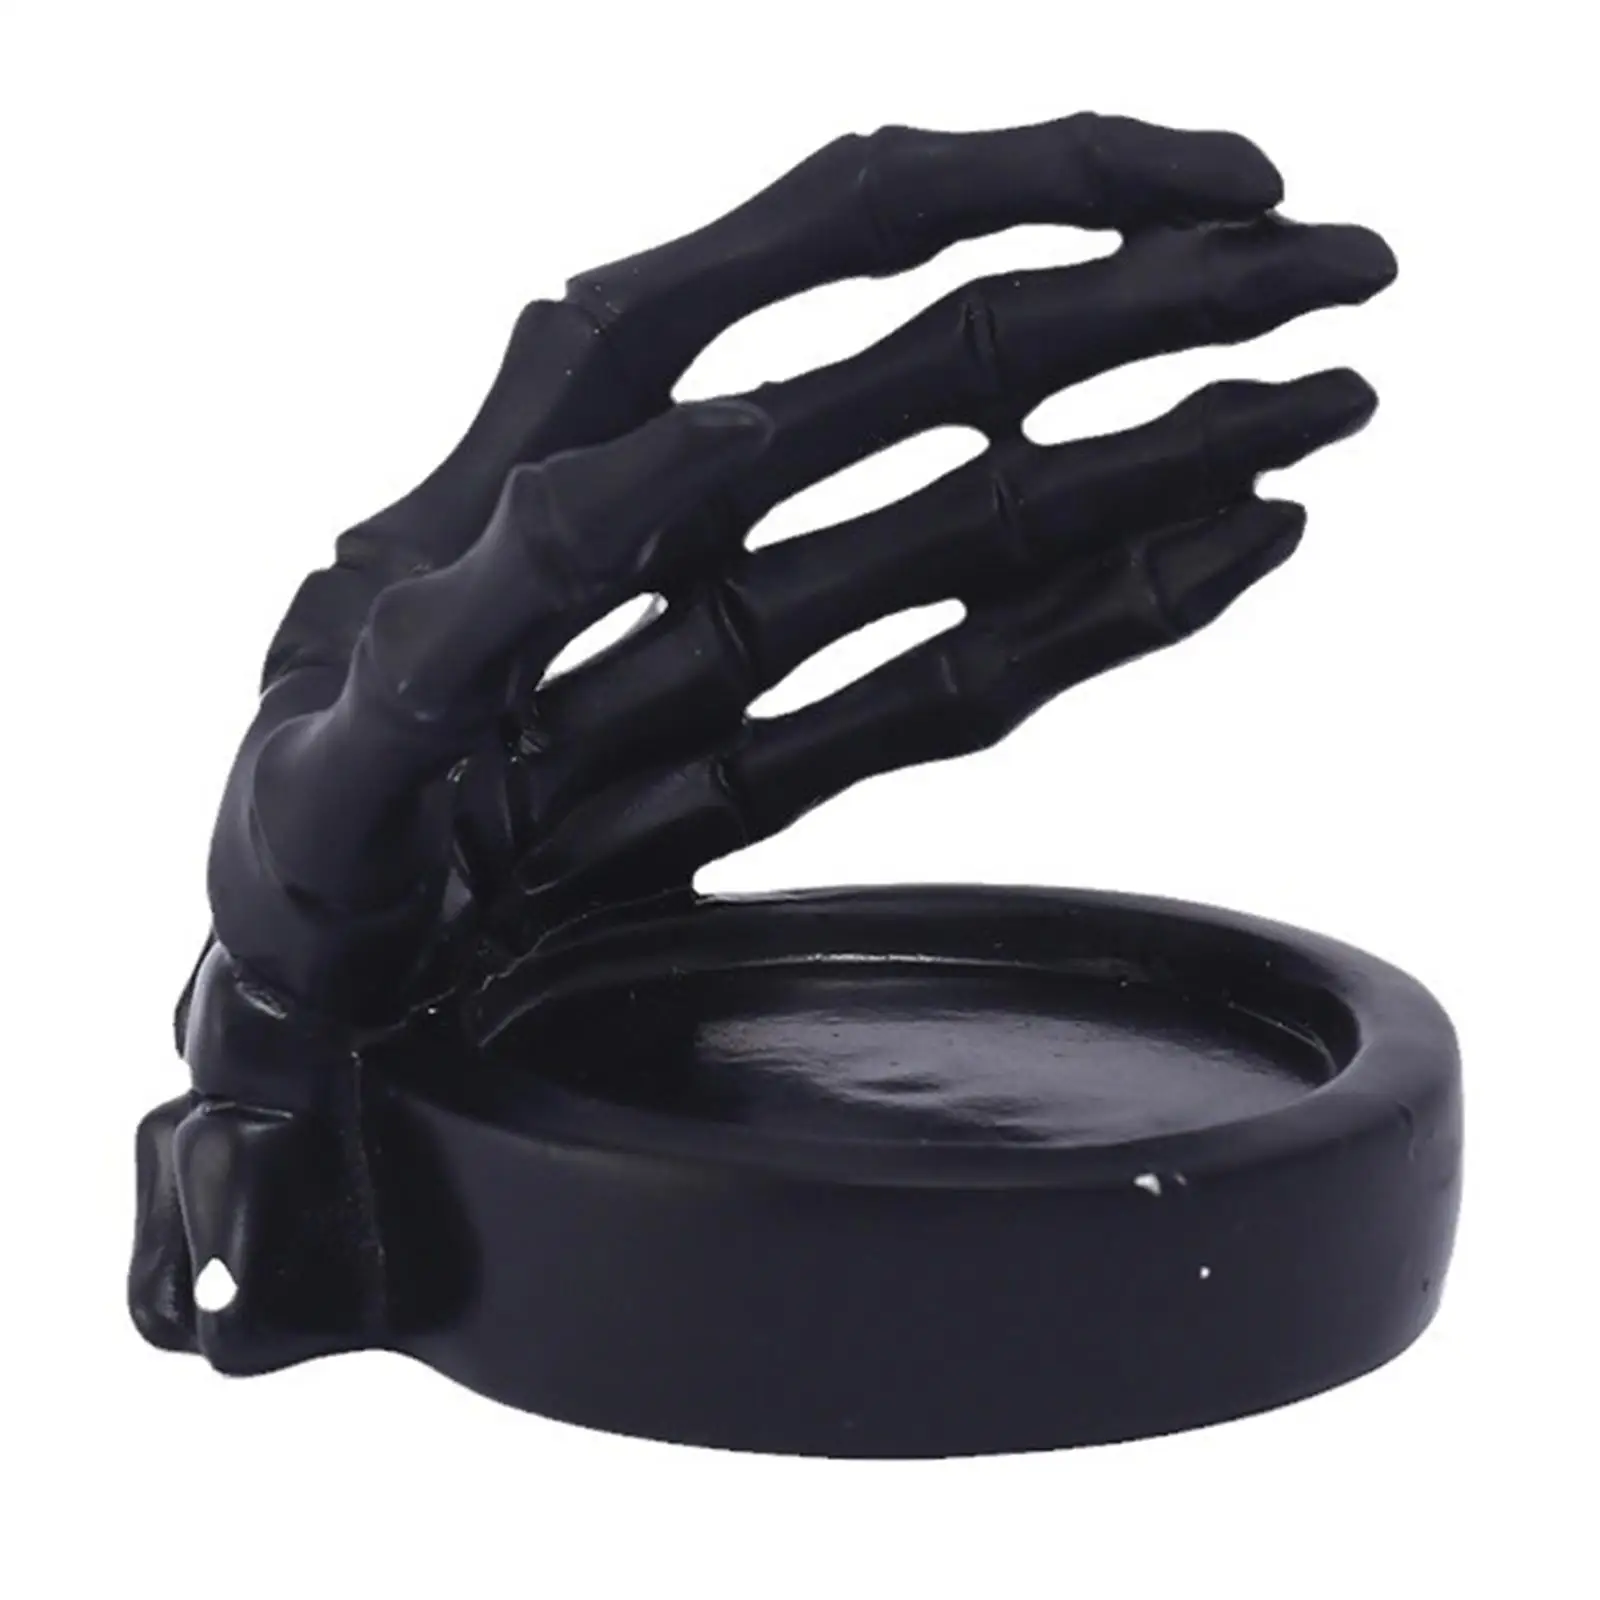 Skeleton Hand Candlestick Stand Candle Holder Stand for Housewarming Gifts